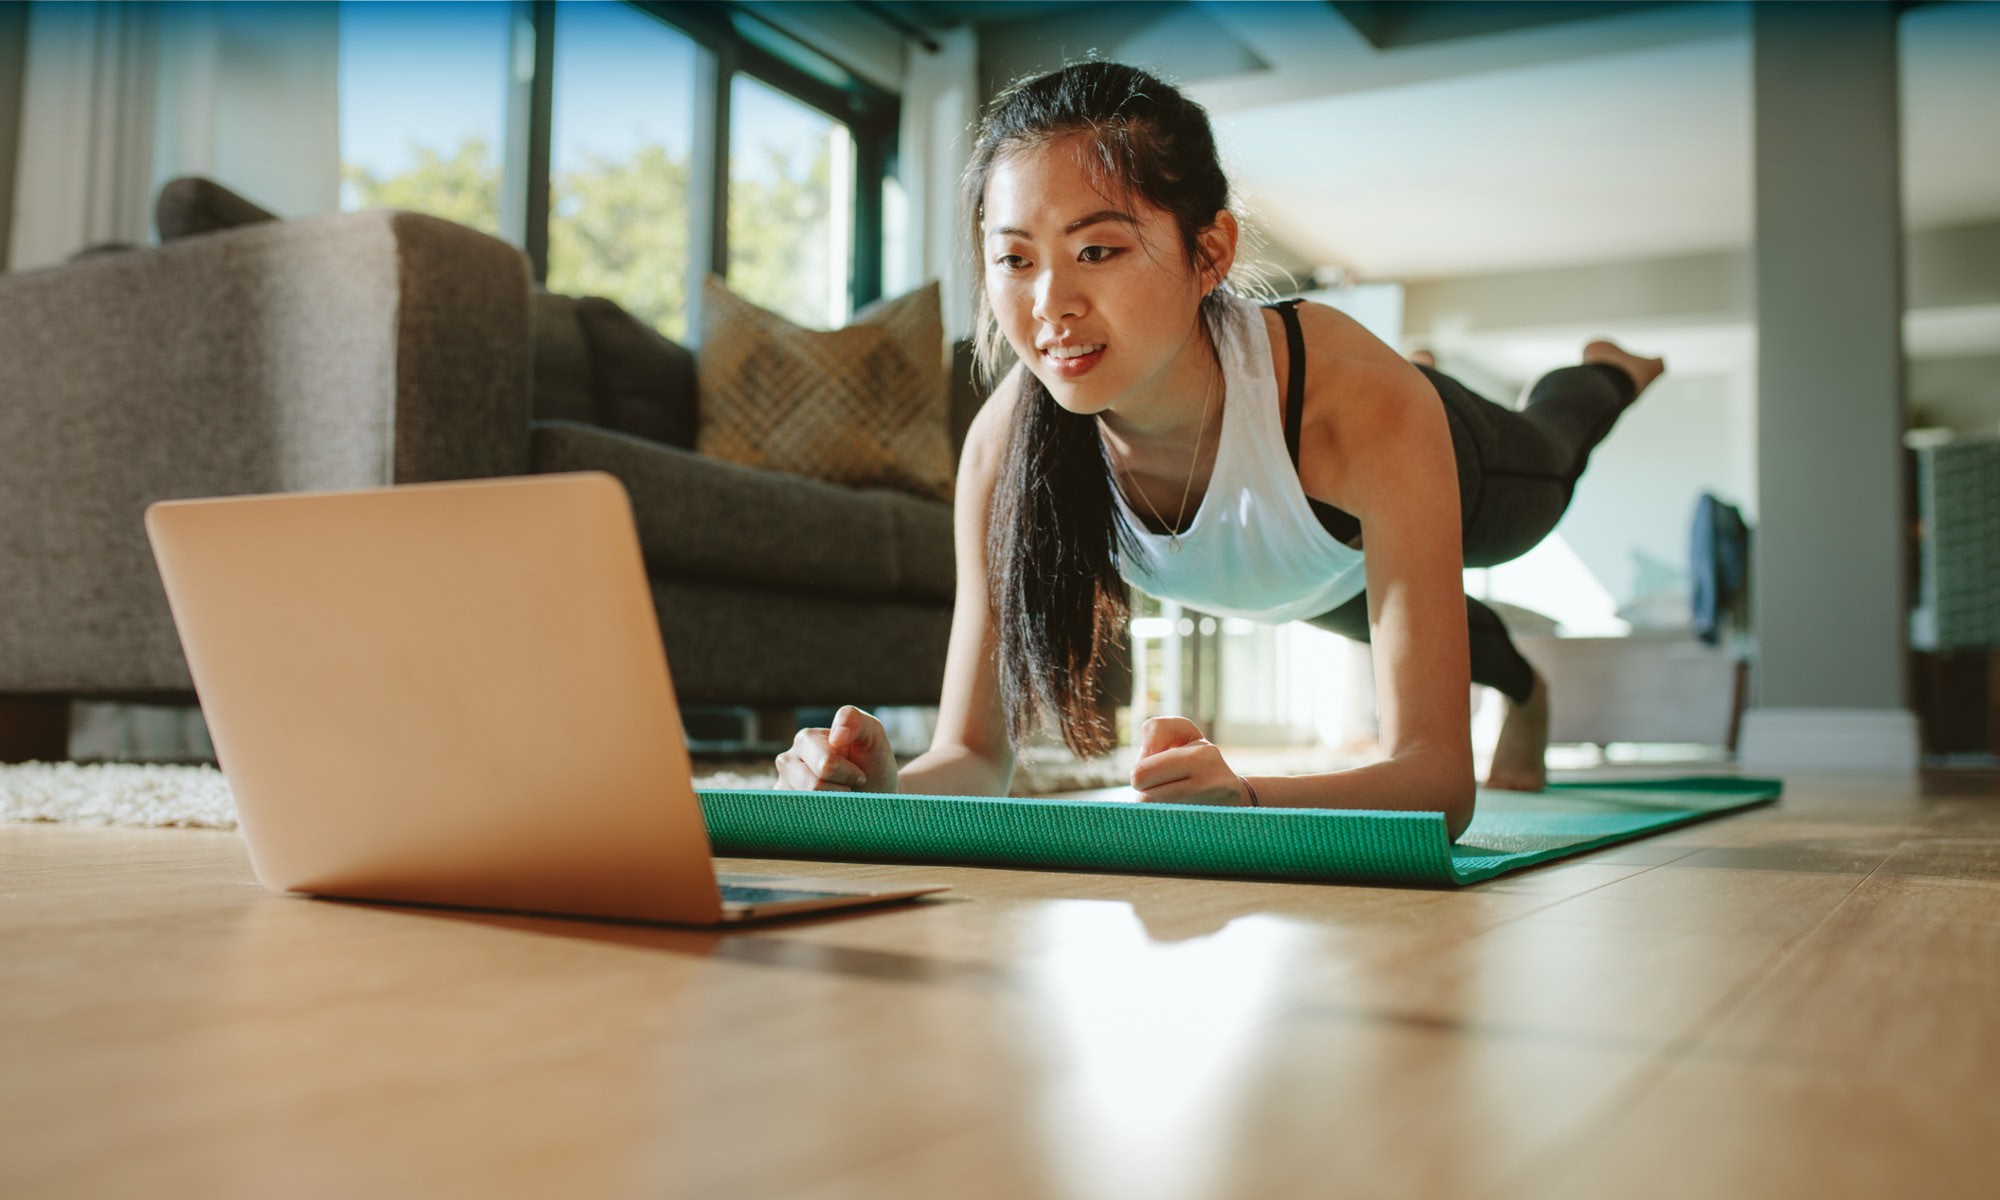 a girl excising while watching videos in laptop in home